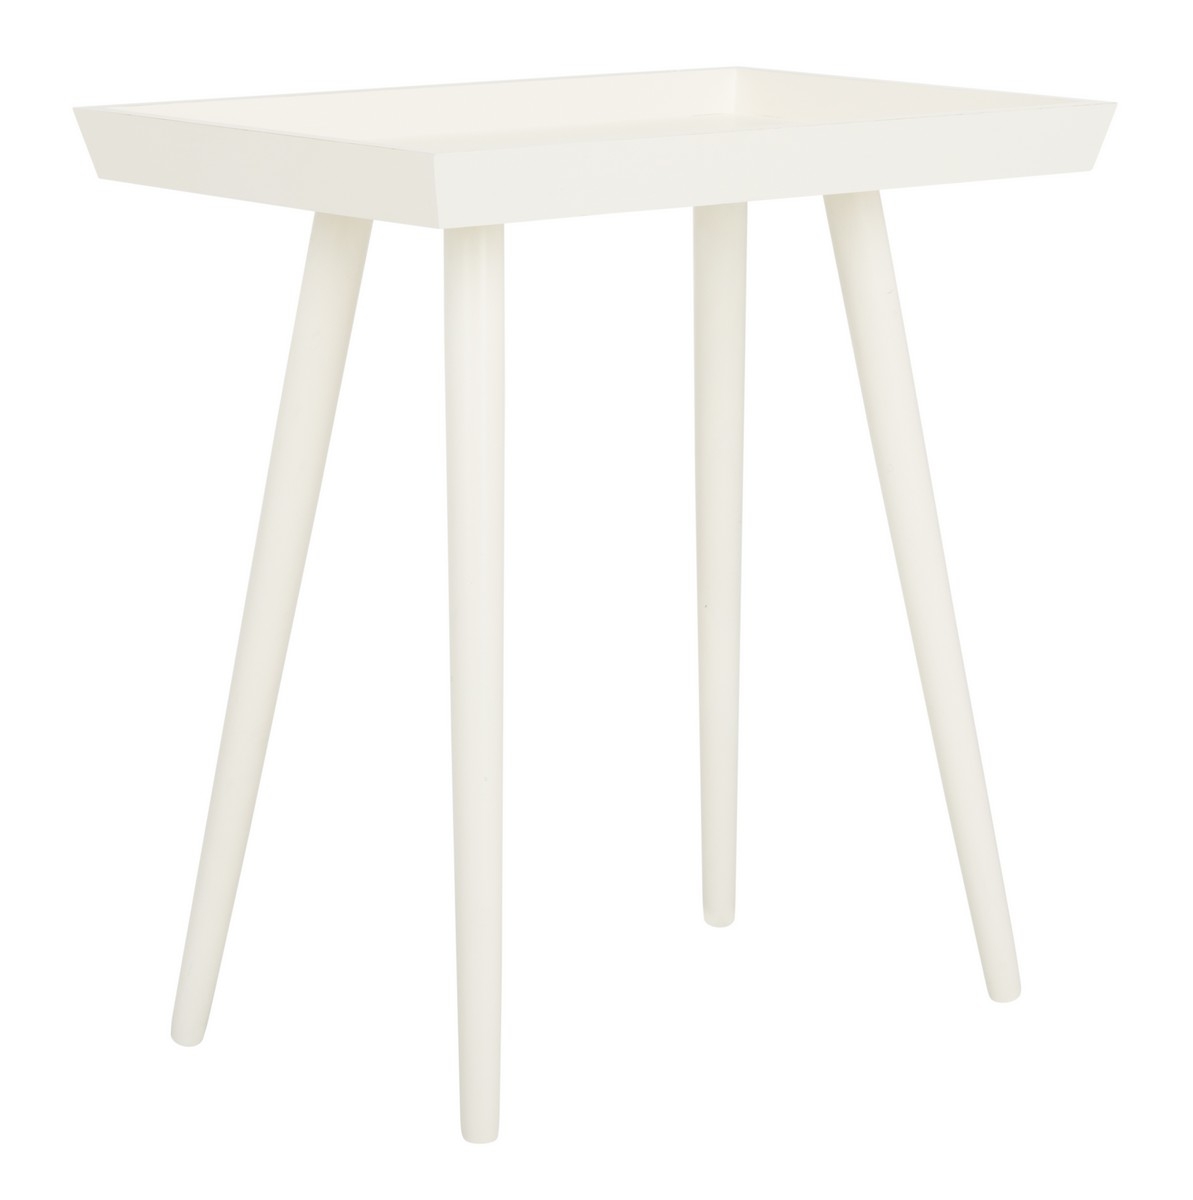 Nonie Tray Accent Table - Distressed White - Arlo Home - Image 2